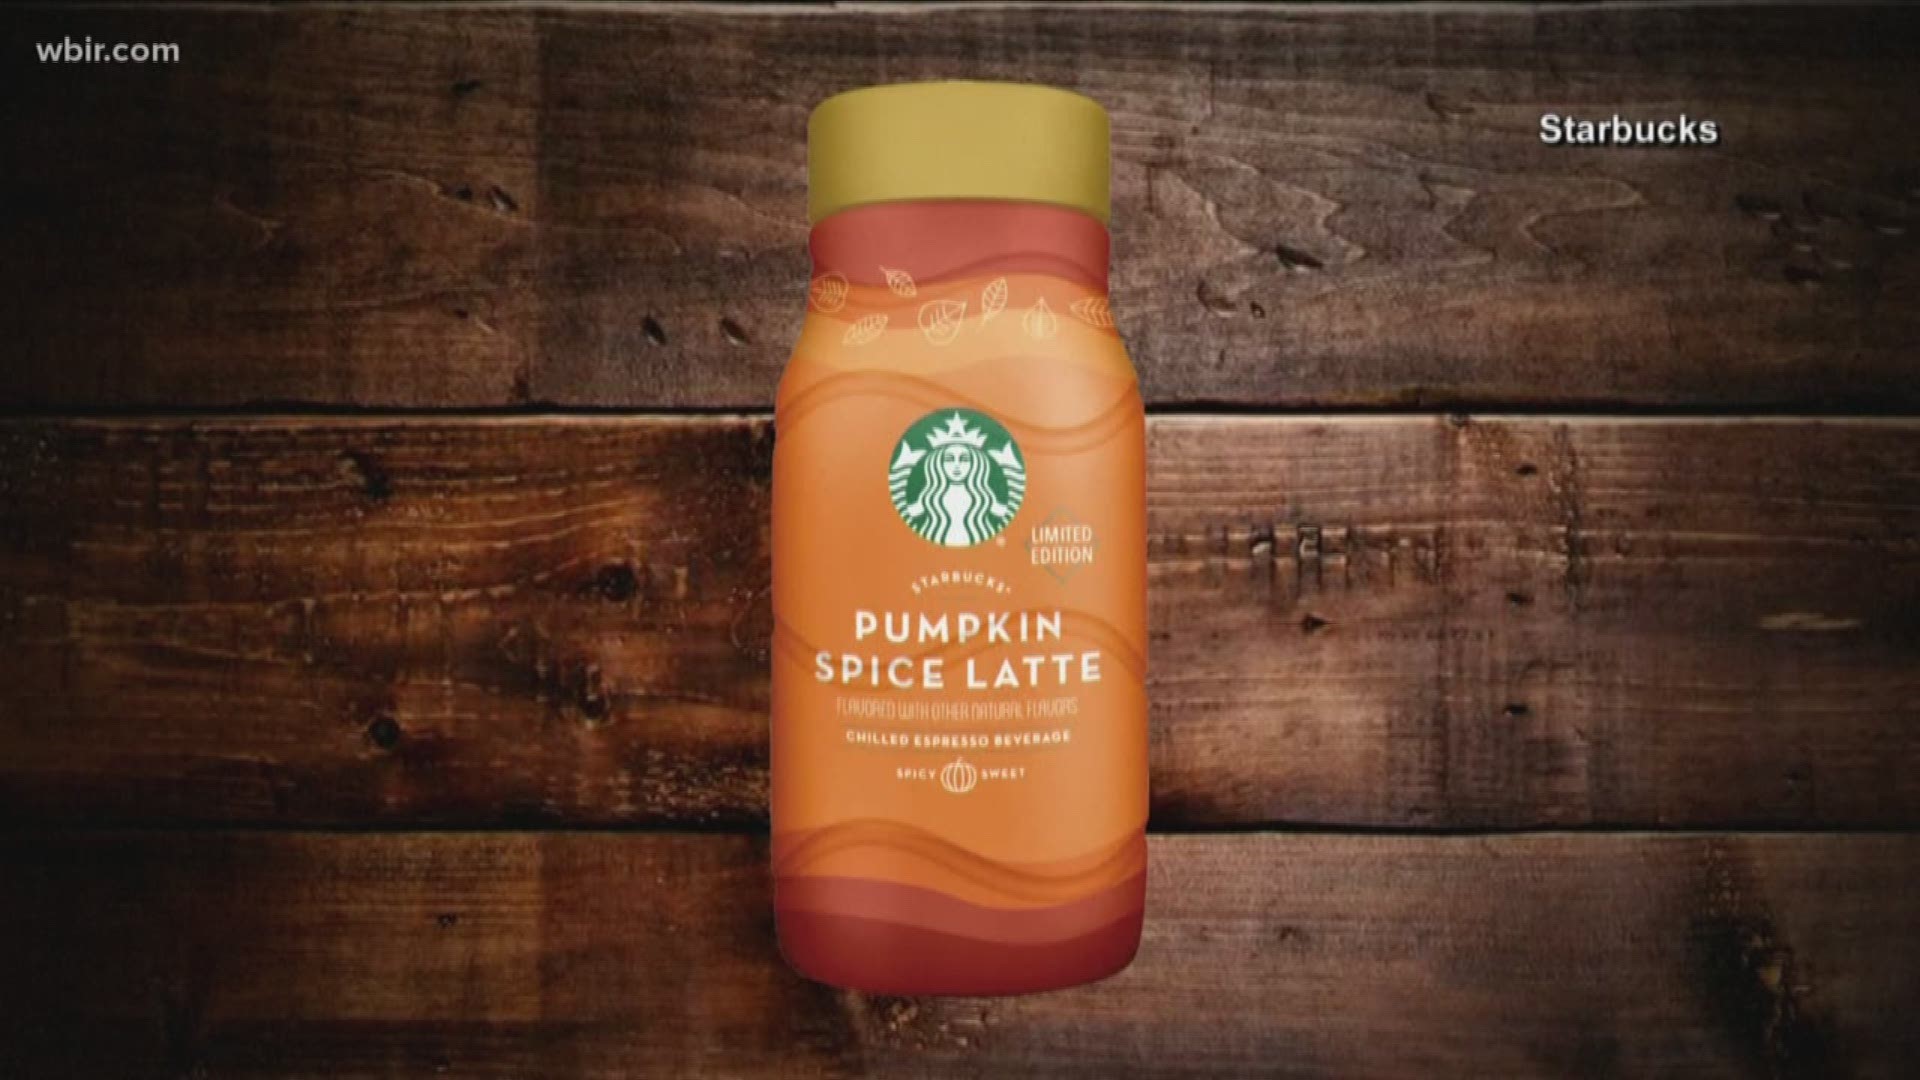 Starbucks is bringing back the Pumpkin Spice Latte in less than one week. The beloved fall drink will hit stores- before the end of August. It will be available Tuesday, almost a full month before fall. This year is the 15th anniversary of the PSL.